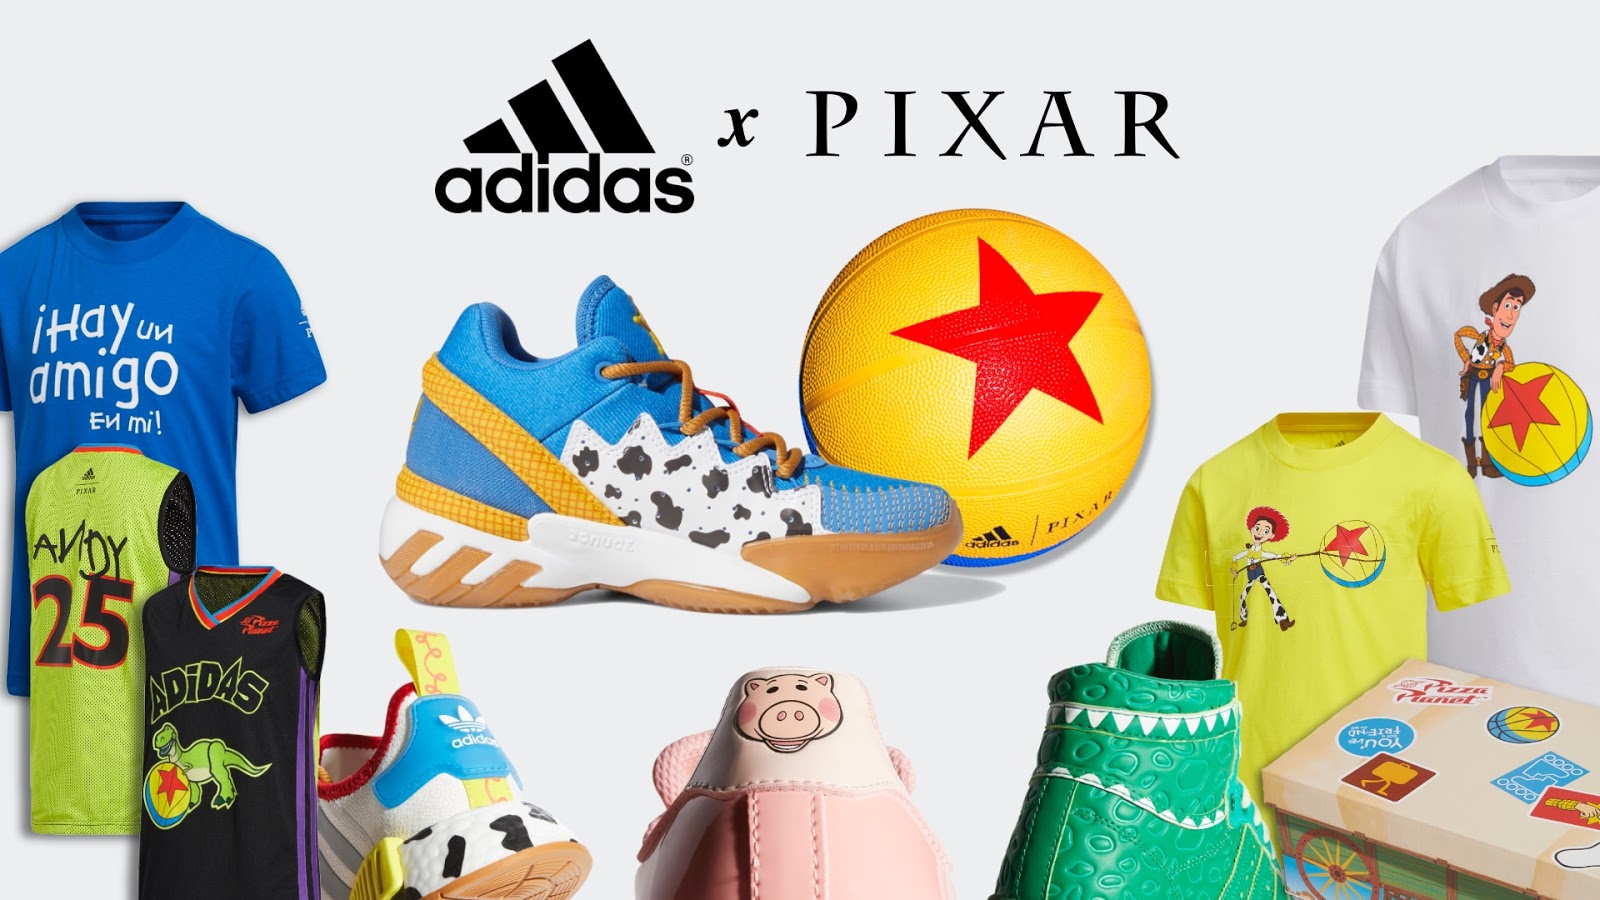 toddler toy story adidas